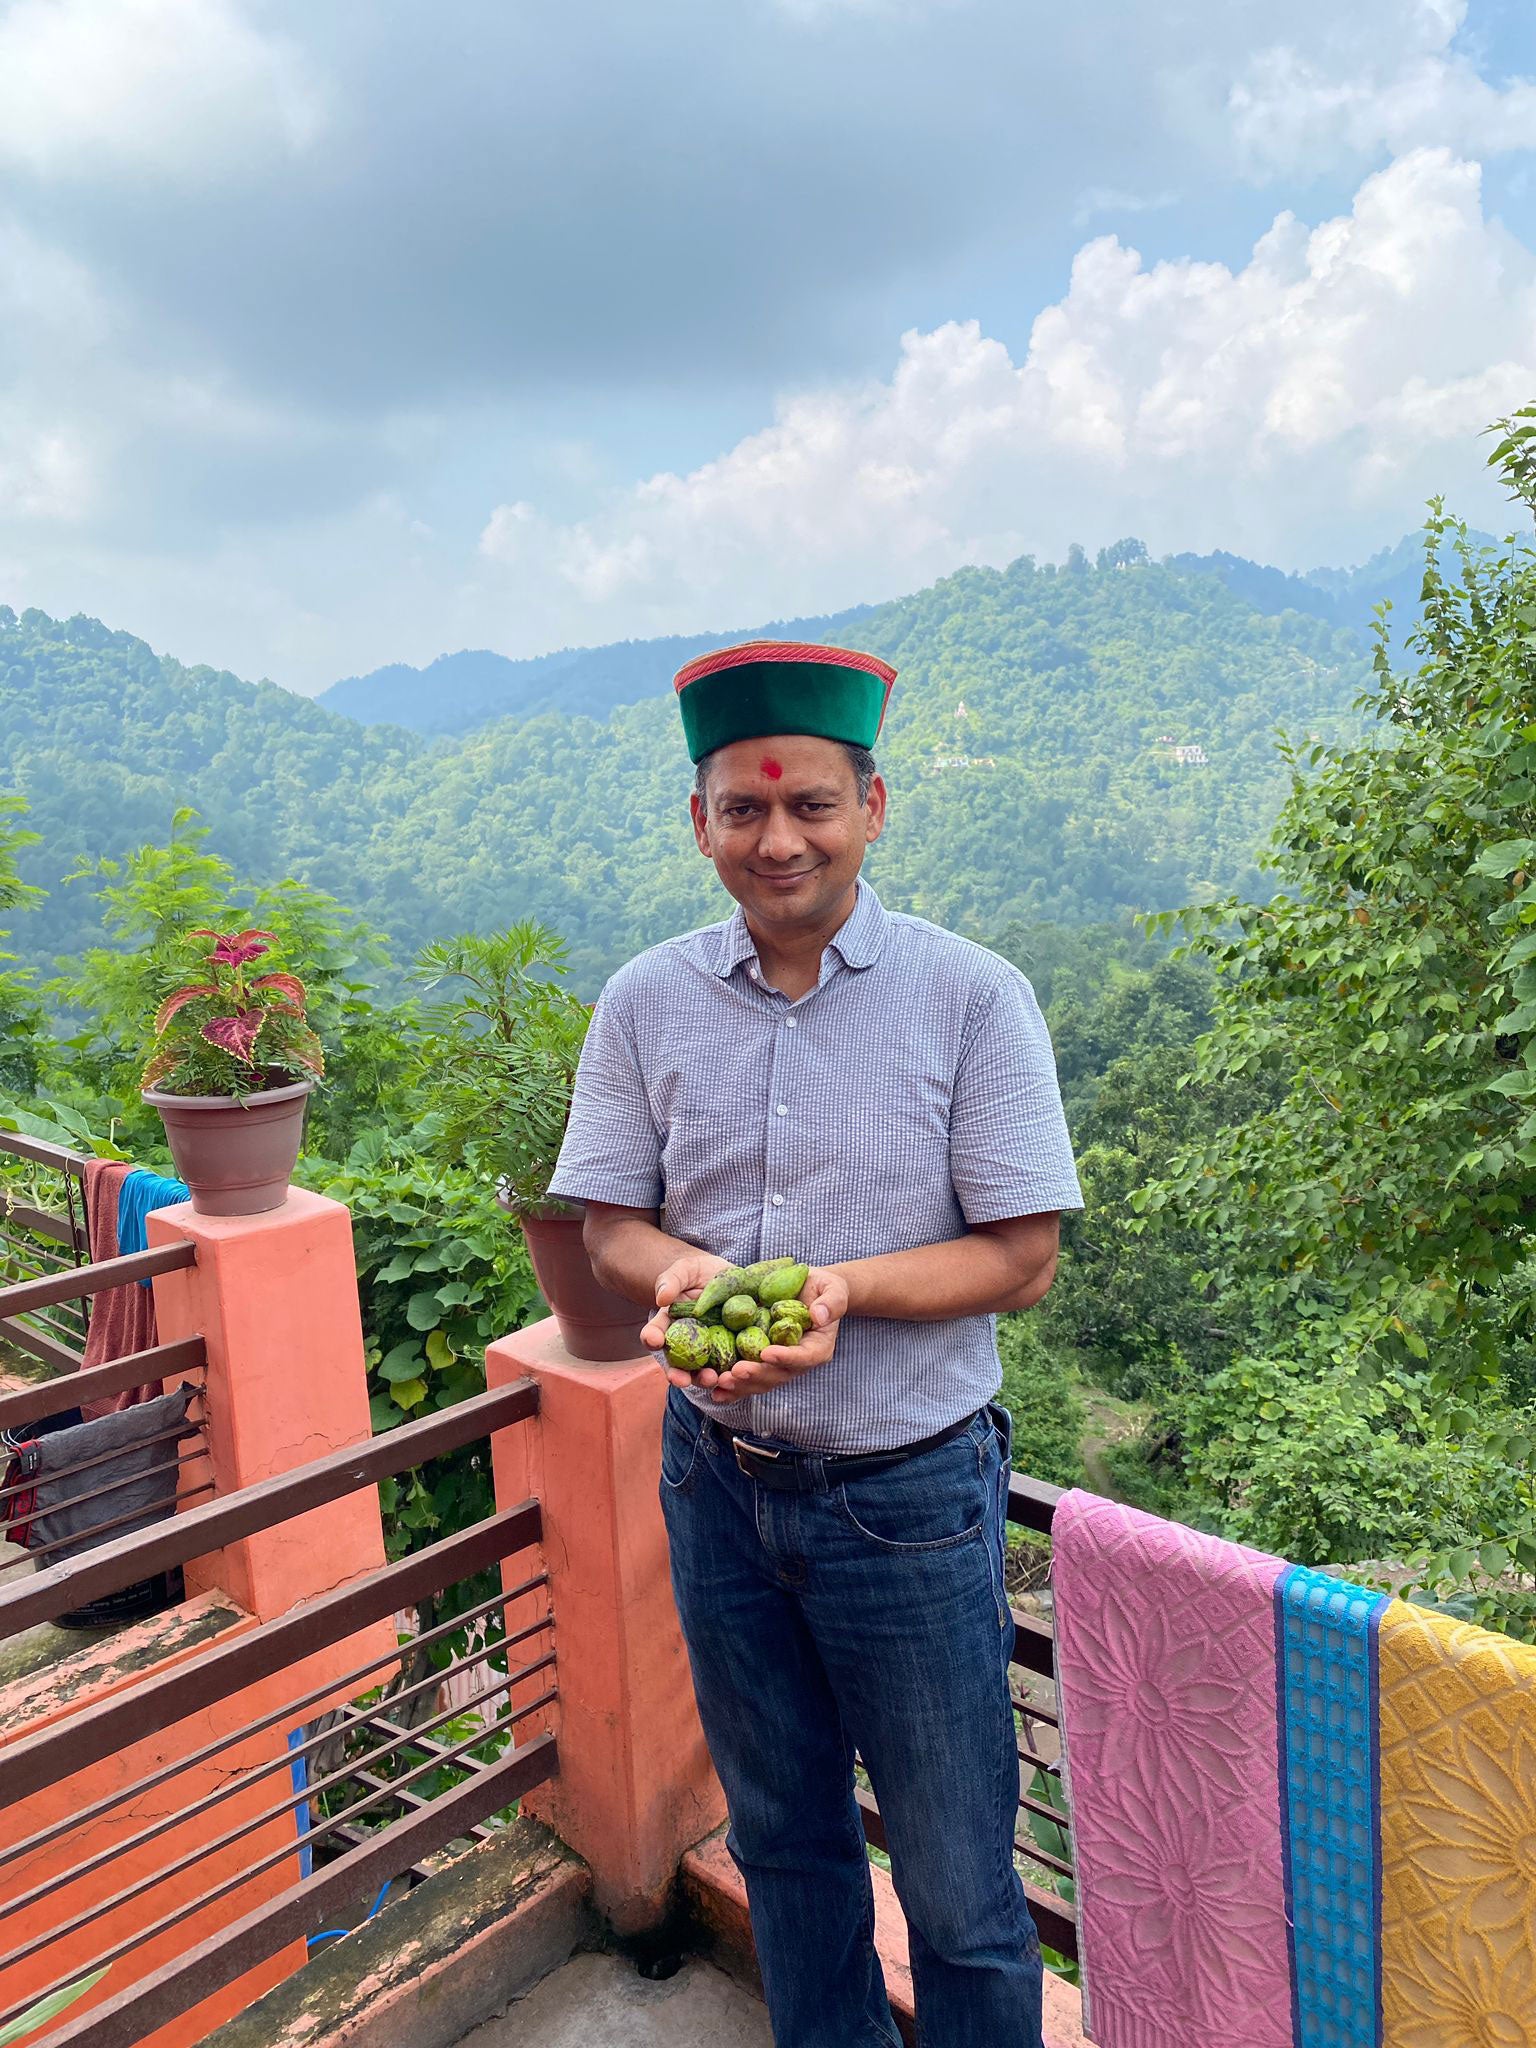 Sandeep standing on a balcony in India with a stunning forested mountain view behind him, holding freshly picked Myrobalan fruit in his hands.